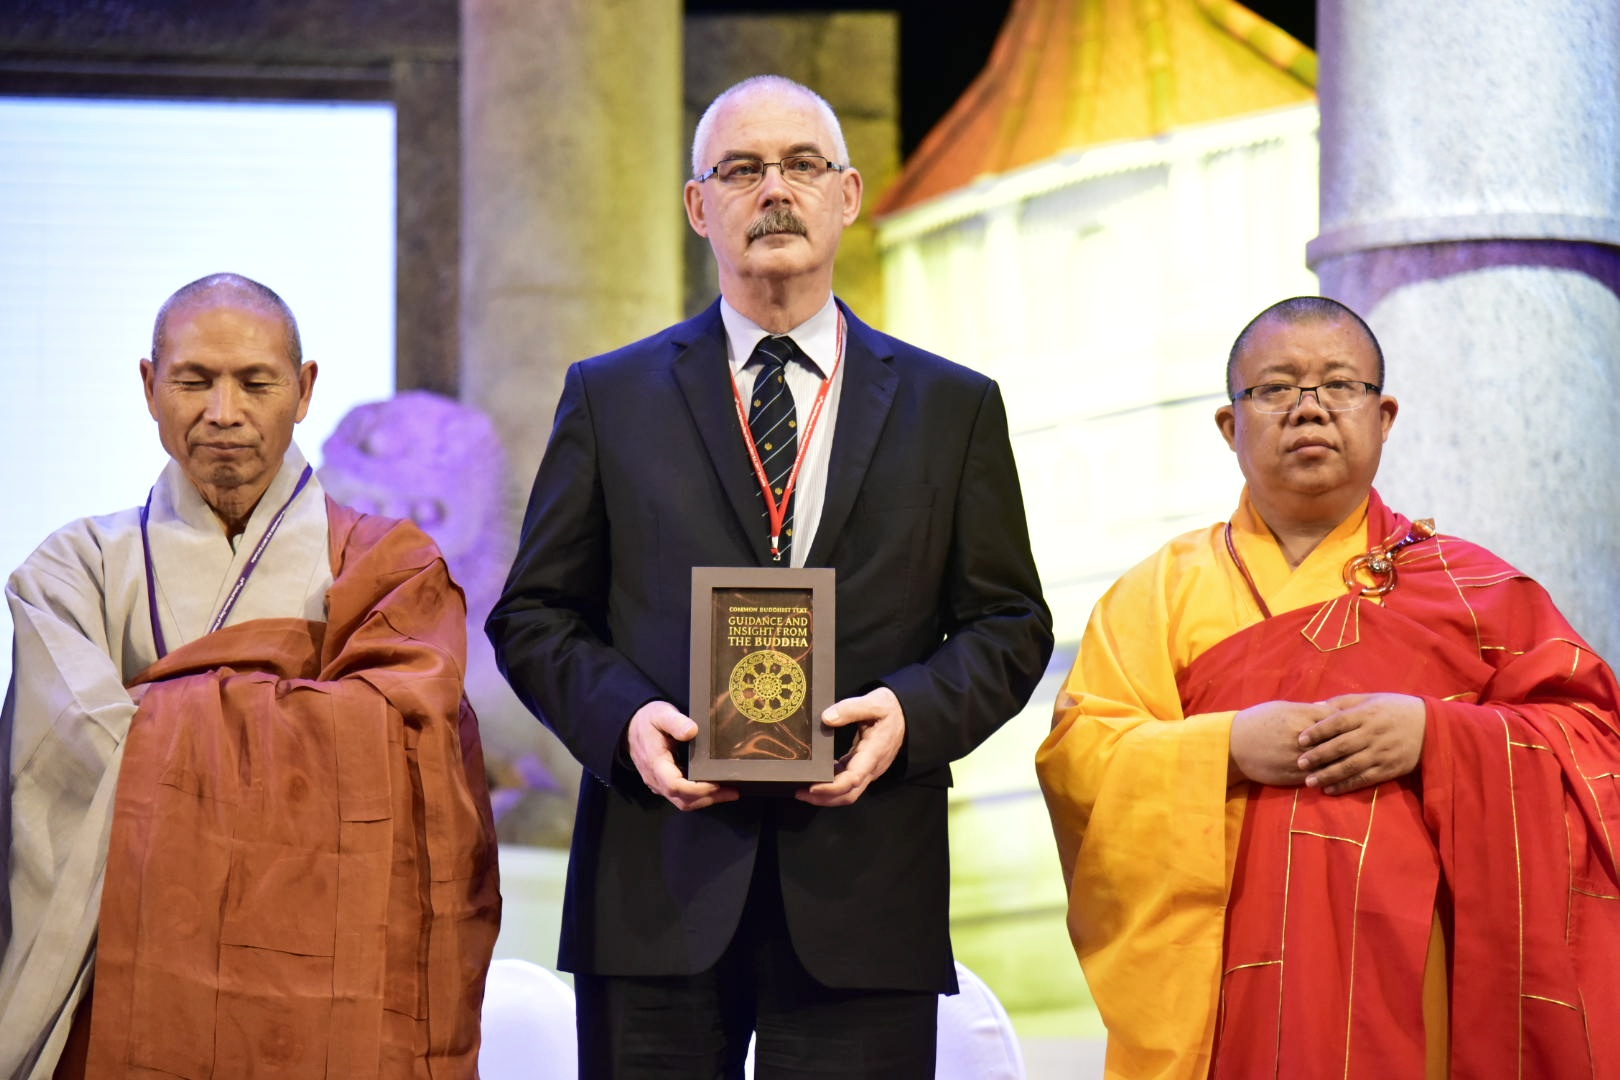 The introduction of Common Buddhist Text to the participant of the celebration.